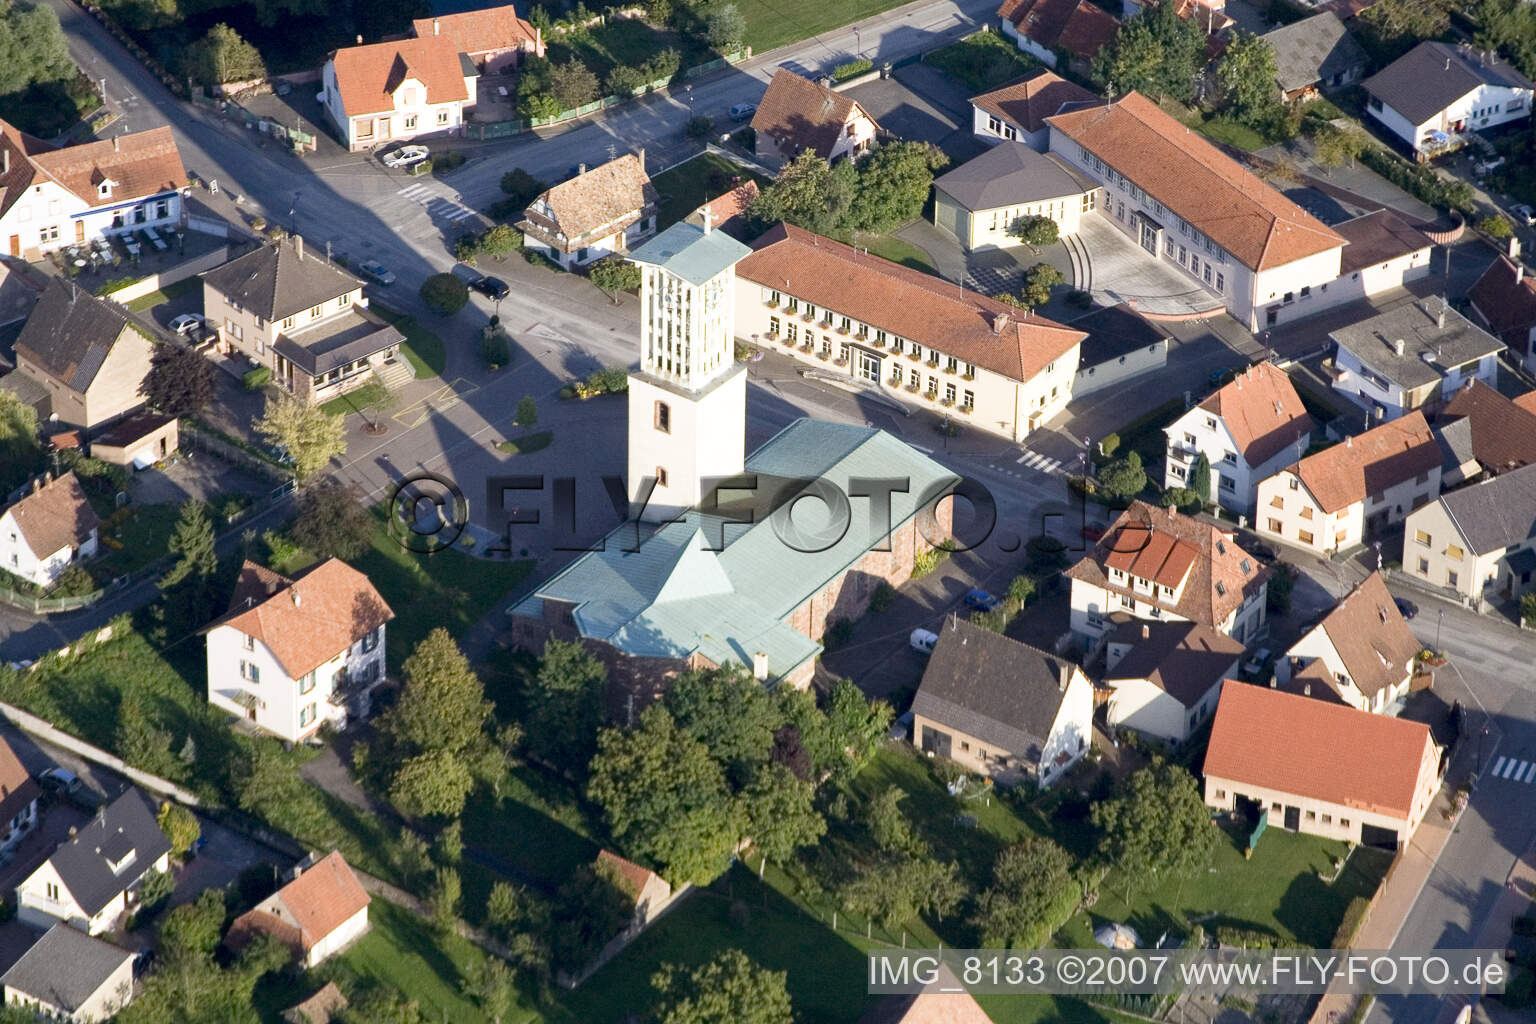 Offendorf in the state Bas-Rhin, France from above